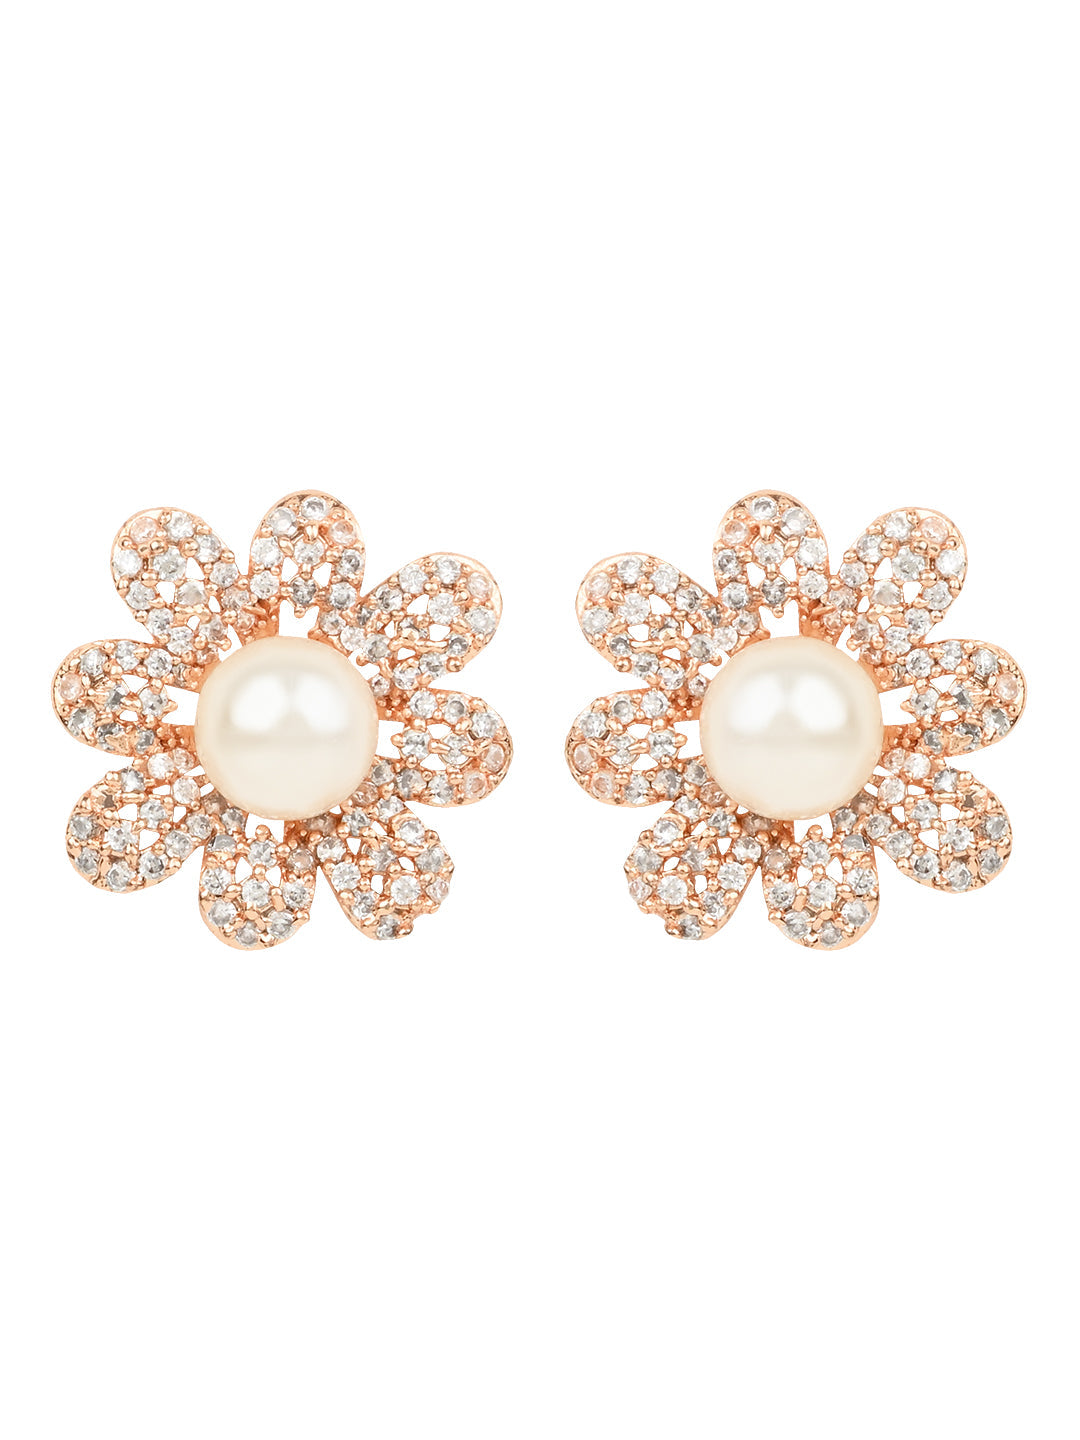 Women's I Jewels Valentine'S Special Rose Gold-Plated & White Floral Studs Earrings (E2974) - I Jewels